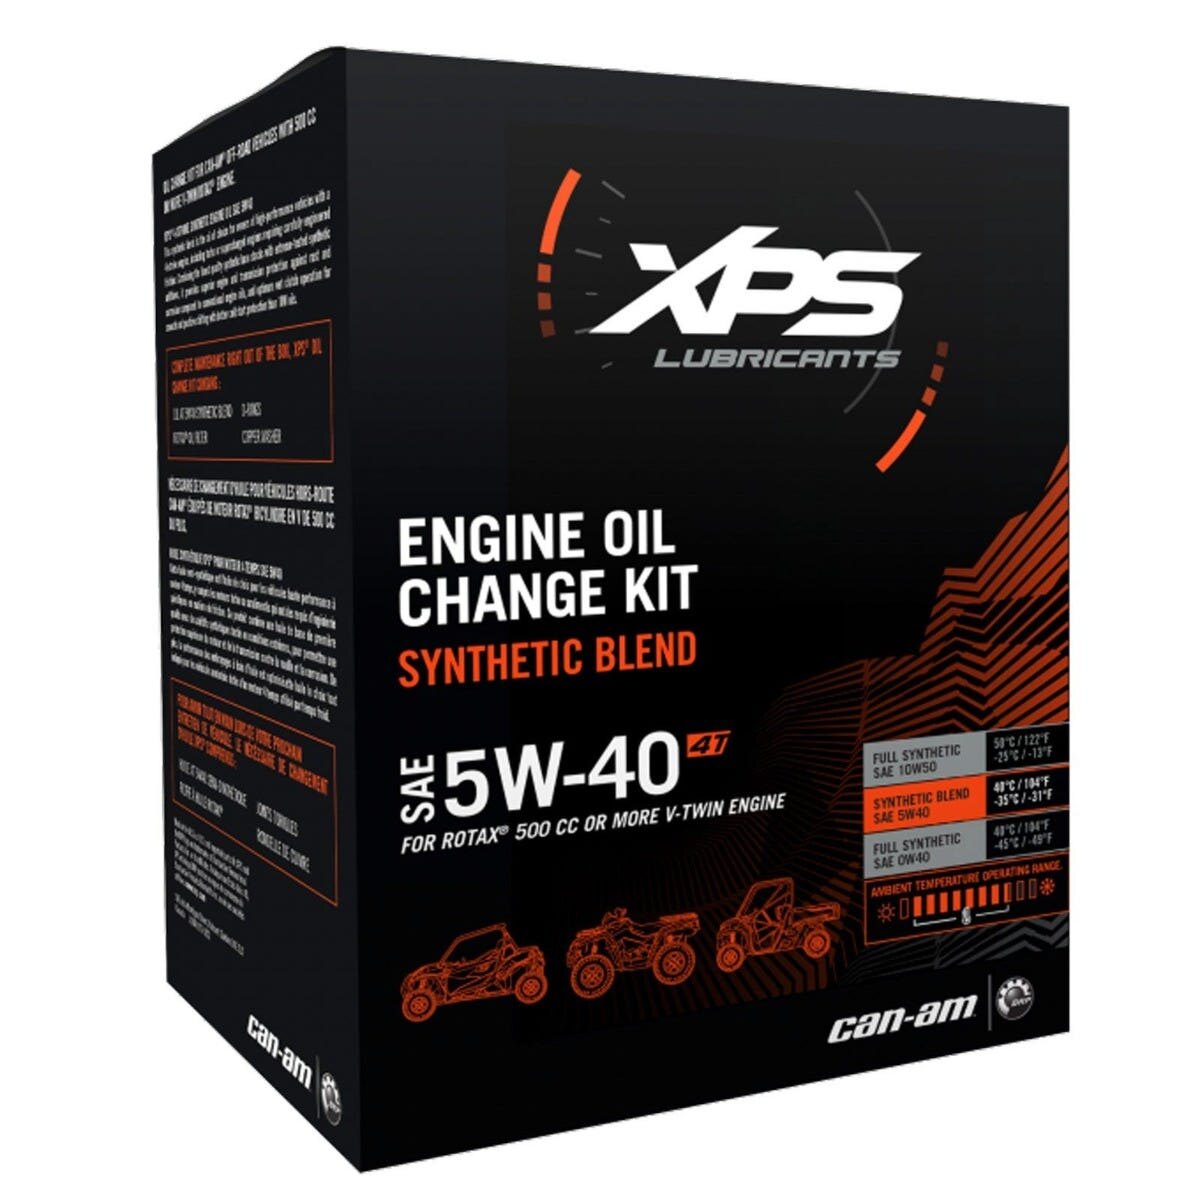 5W 40 Synthetic Blend Oil Change Kit for Can Am ATV/SSV Rotax 500 cc or Greater V Twin Engines